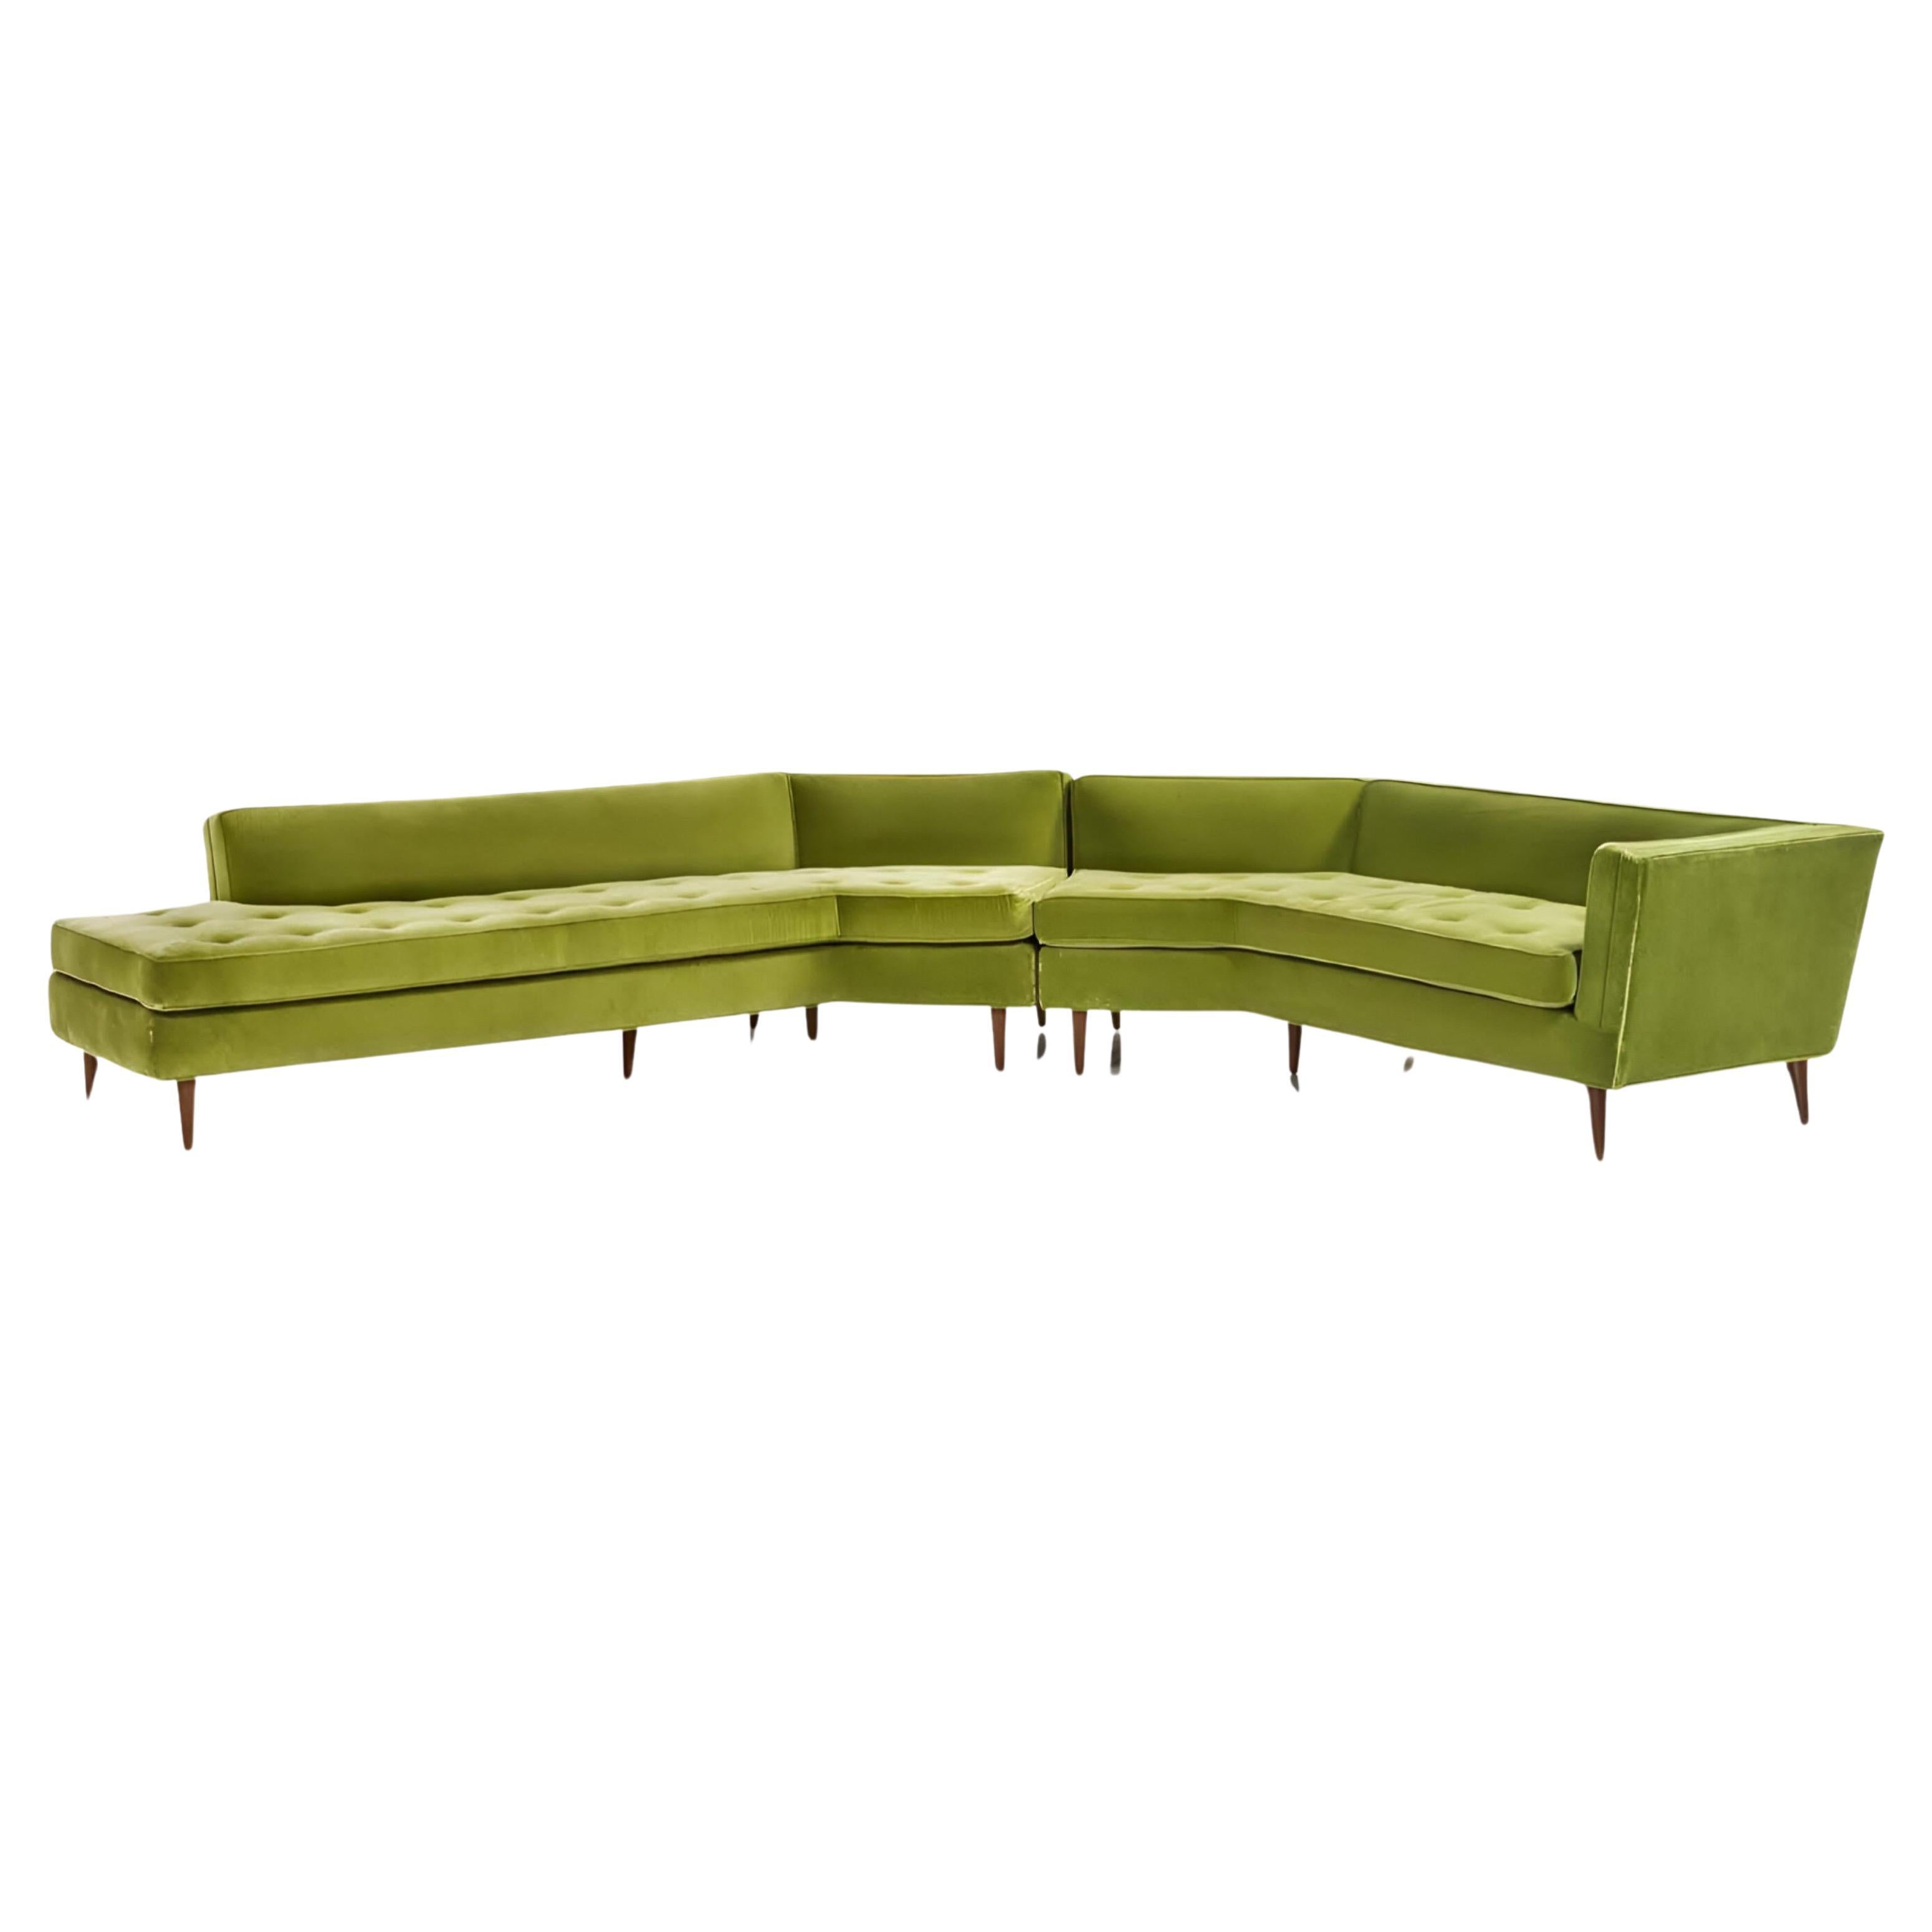 Large sofa in solid walnut and green velvet by Bertha Schaefer